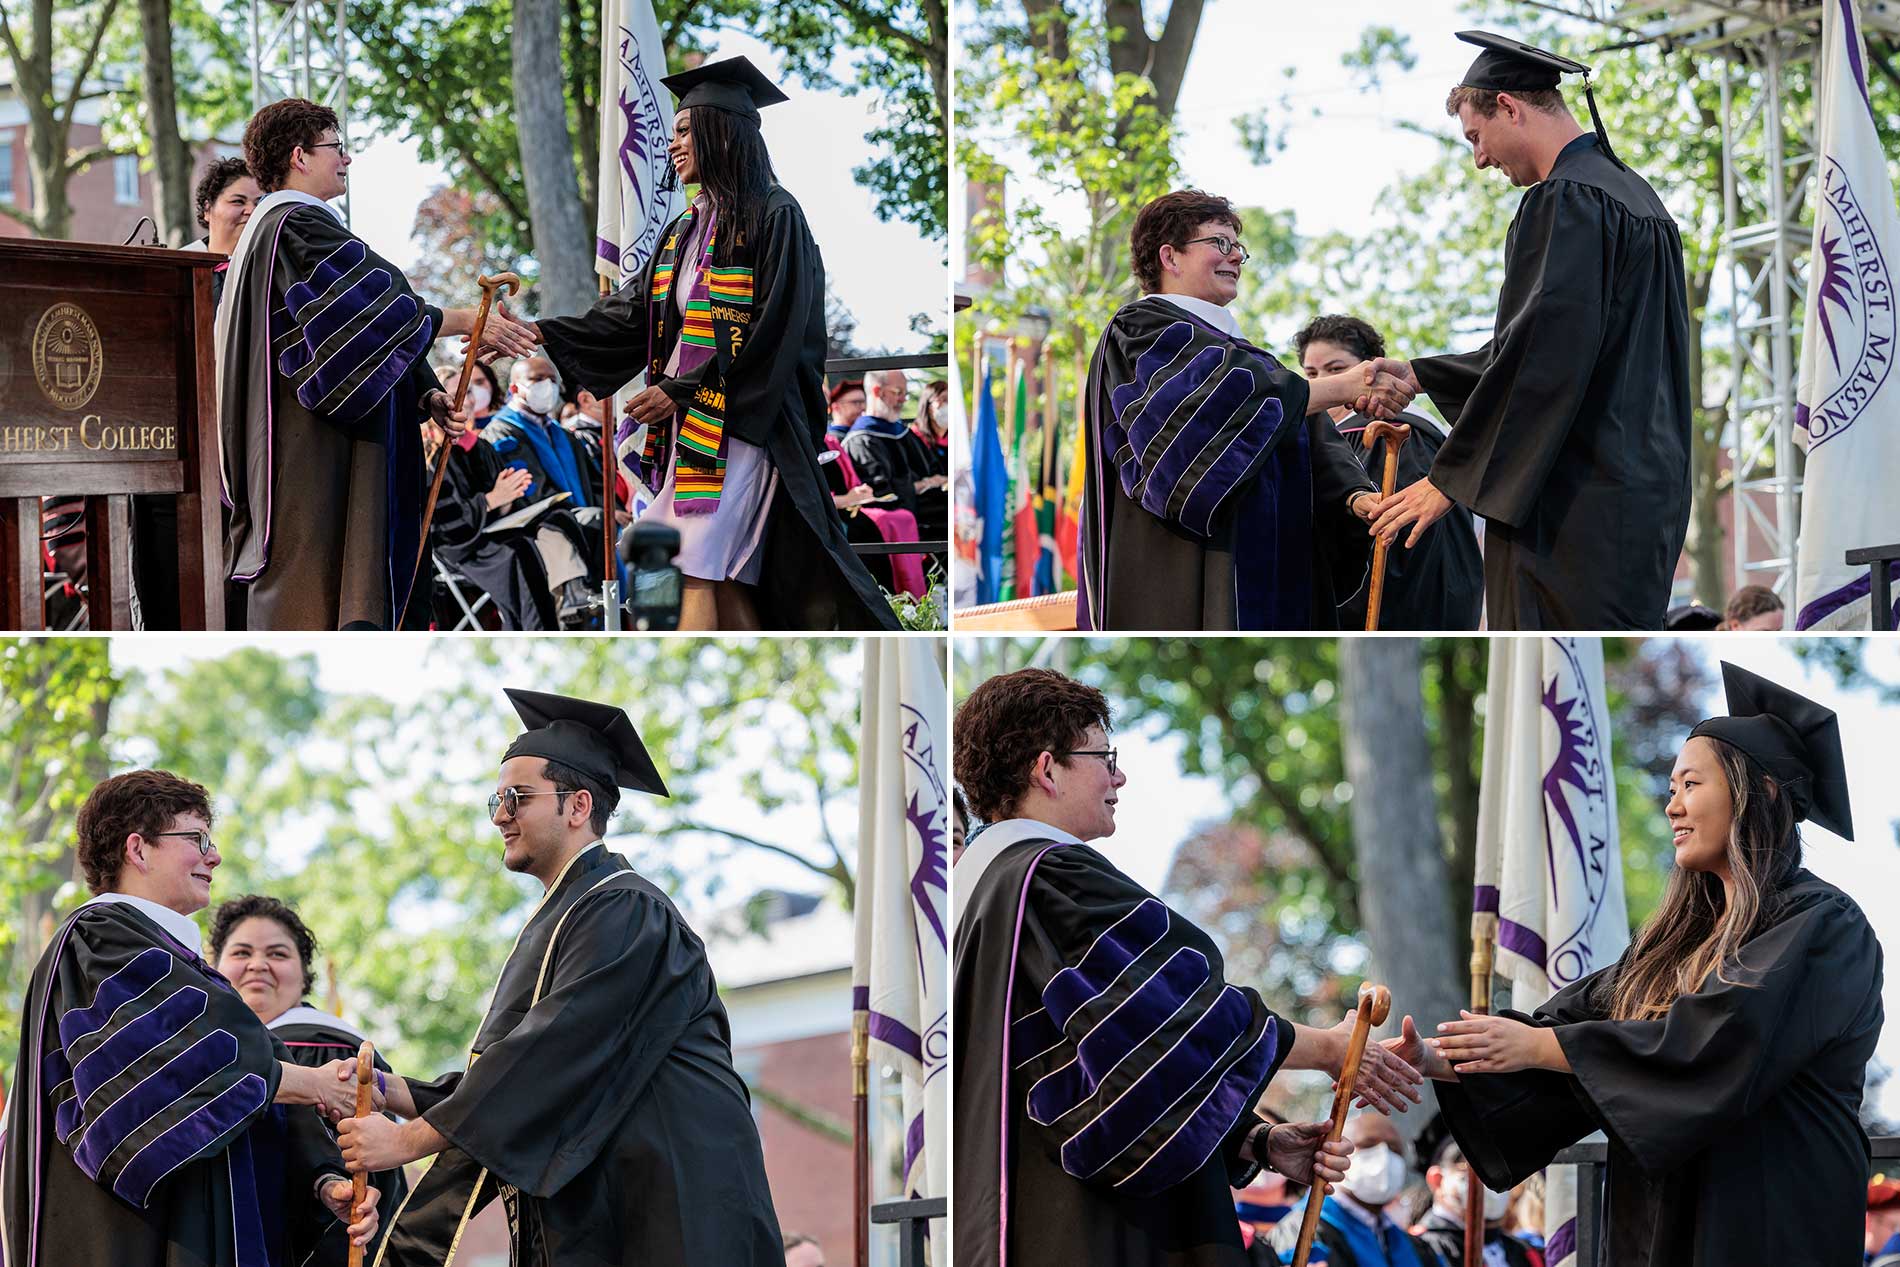 Four graduates shake hands with President Martin after receiving their diplomas.